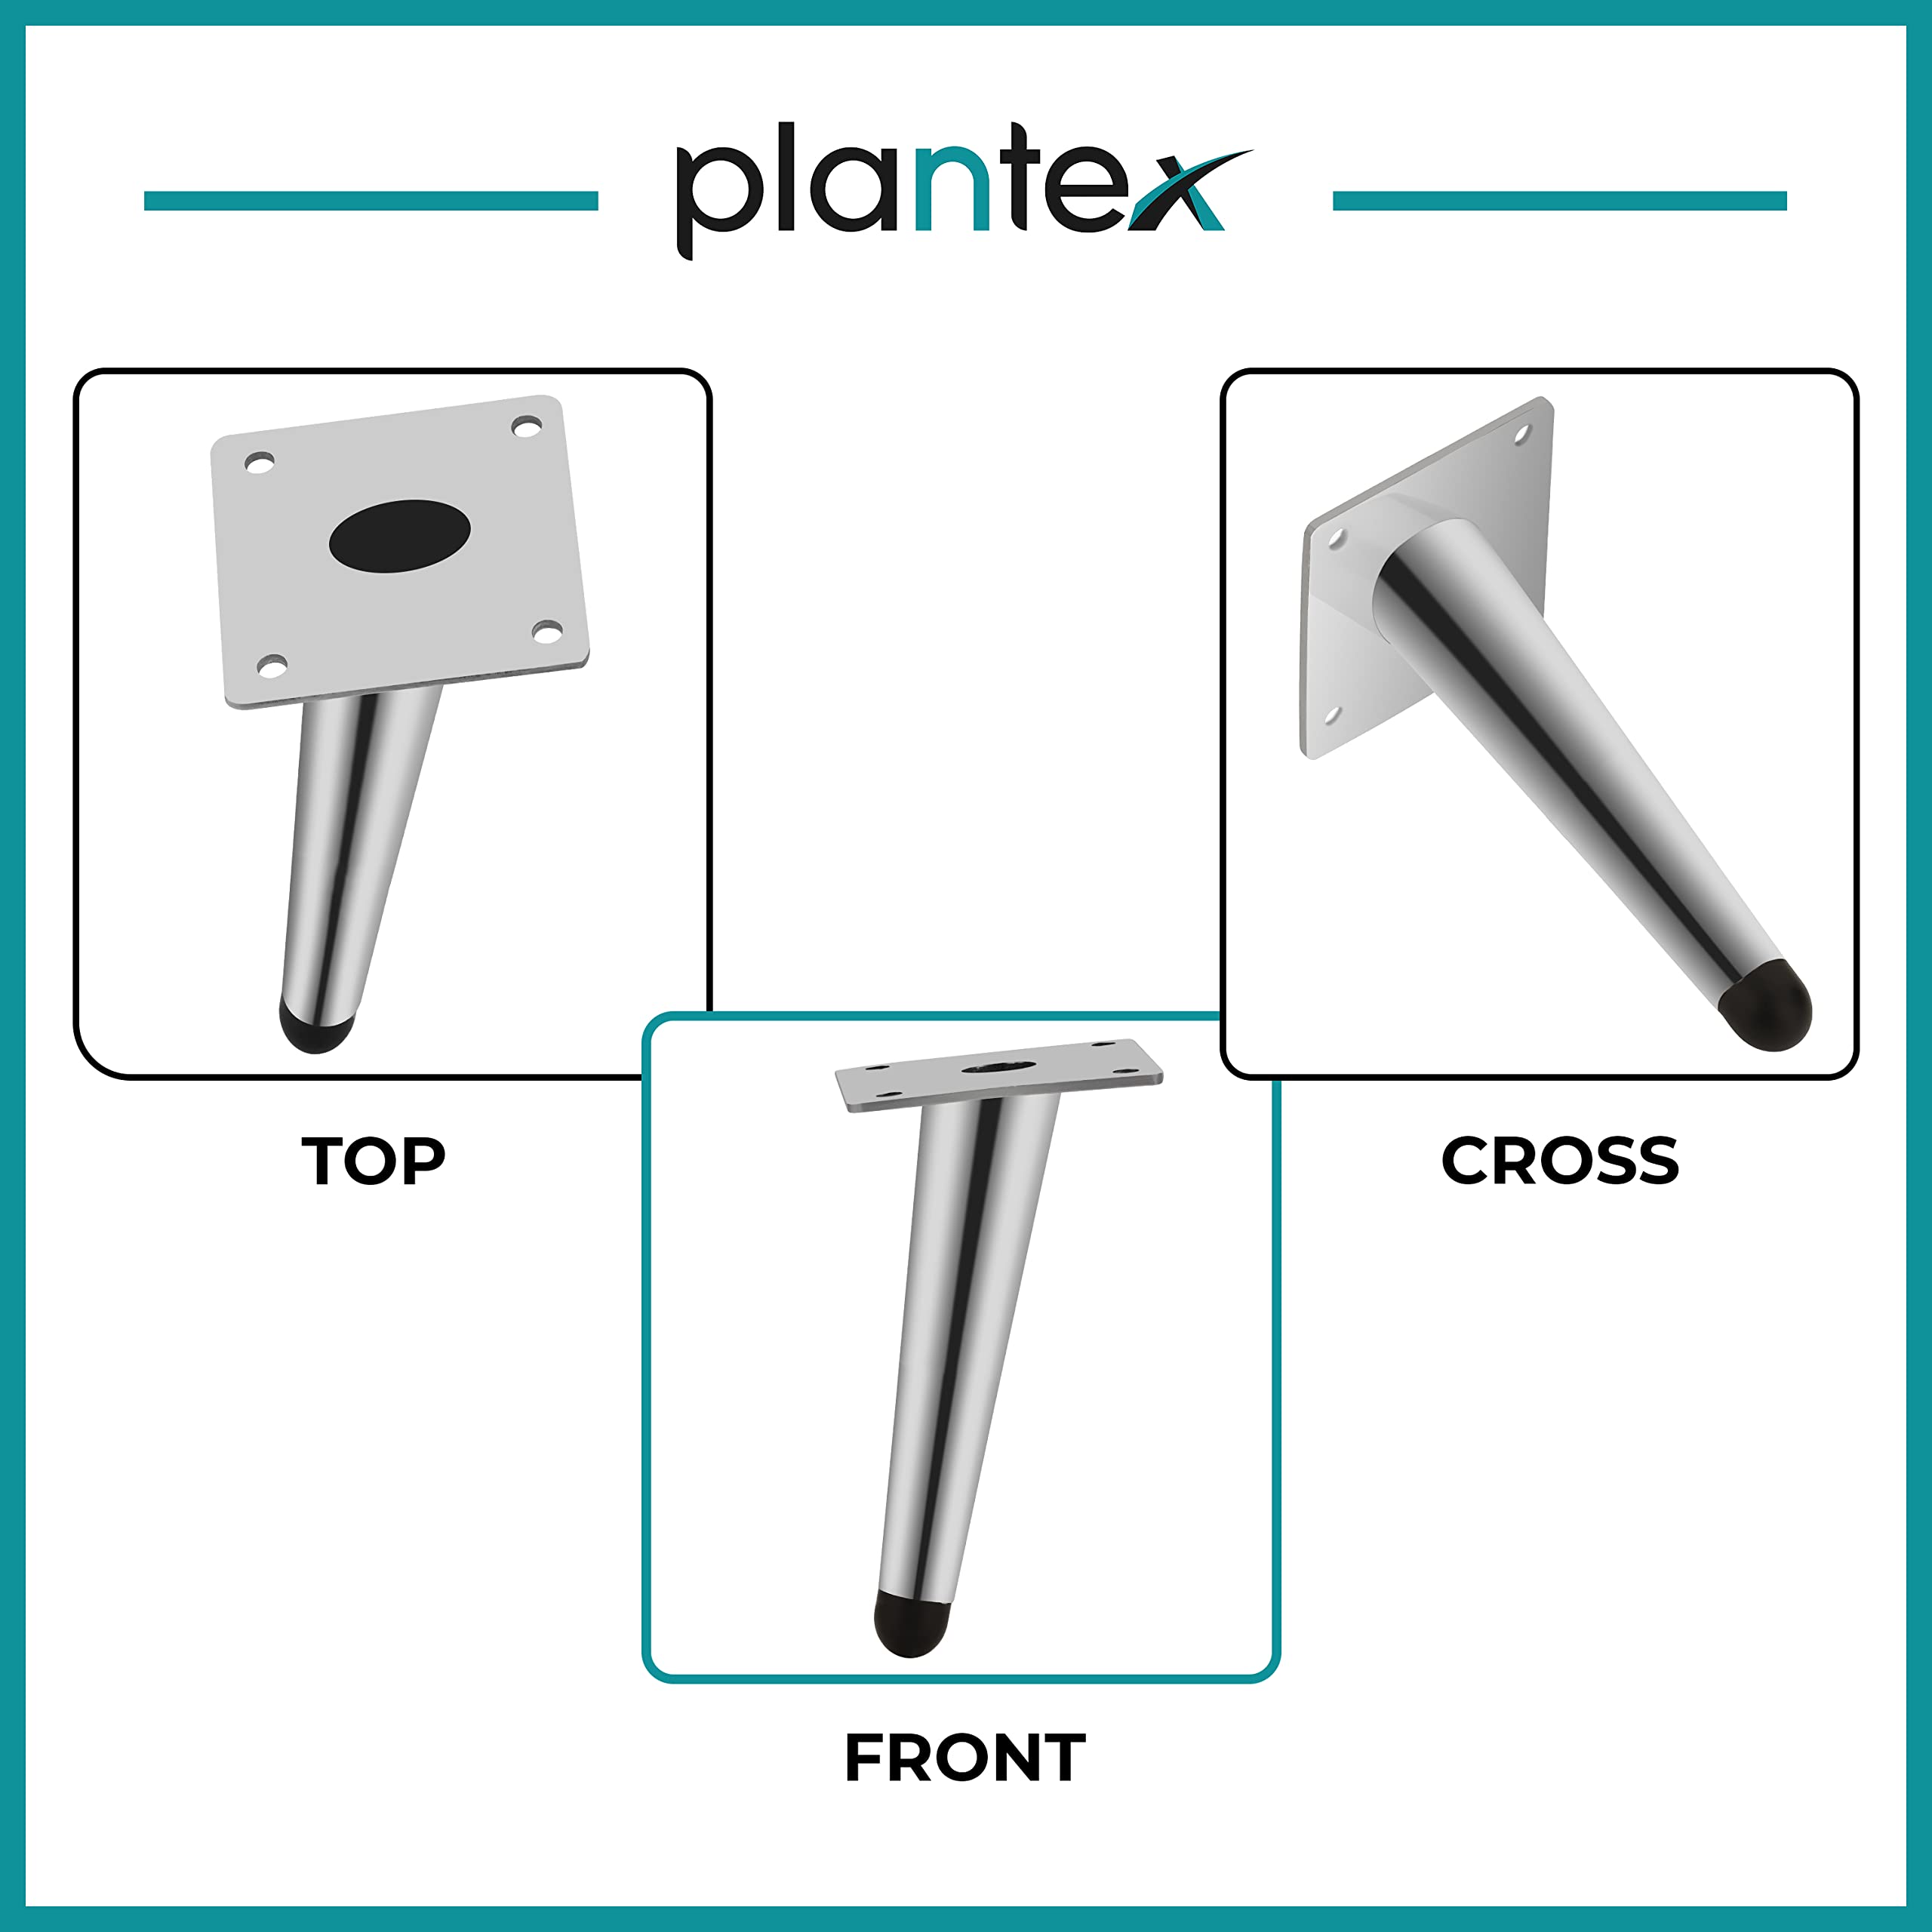 Plantex 304 Grade Stainless Steel 6 inch Sofa Leg/Bed Furniture Leg Pair for Home Furnitures (DTS-54-Chrome) – 6 Pcs